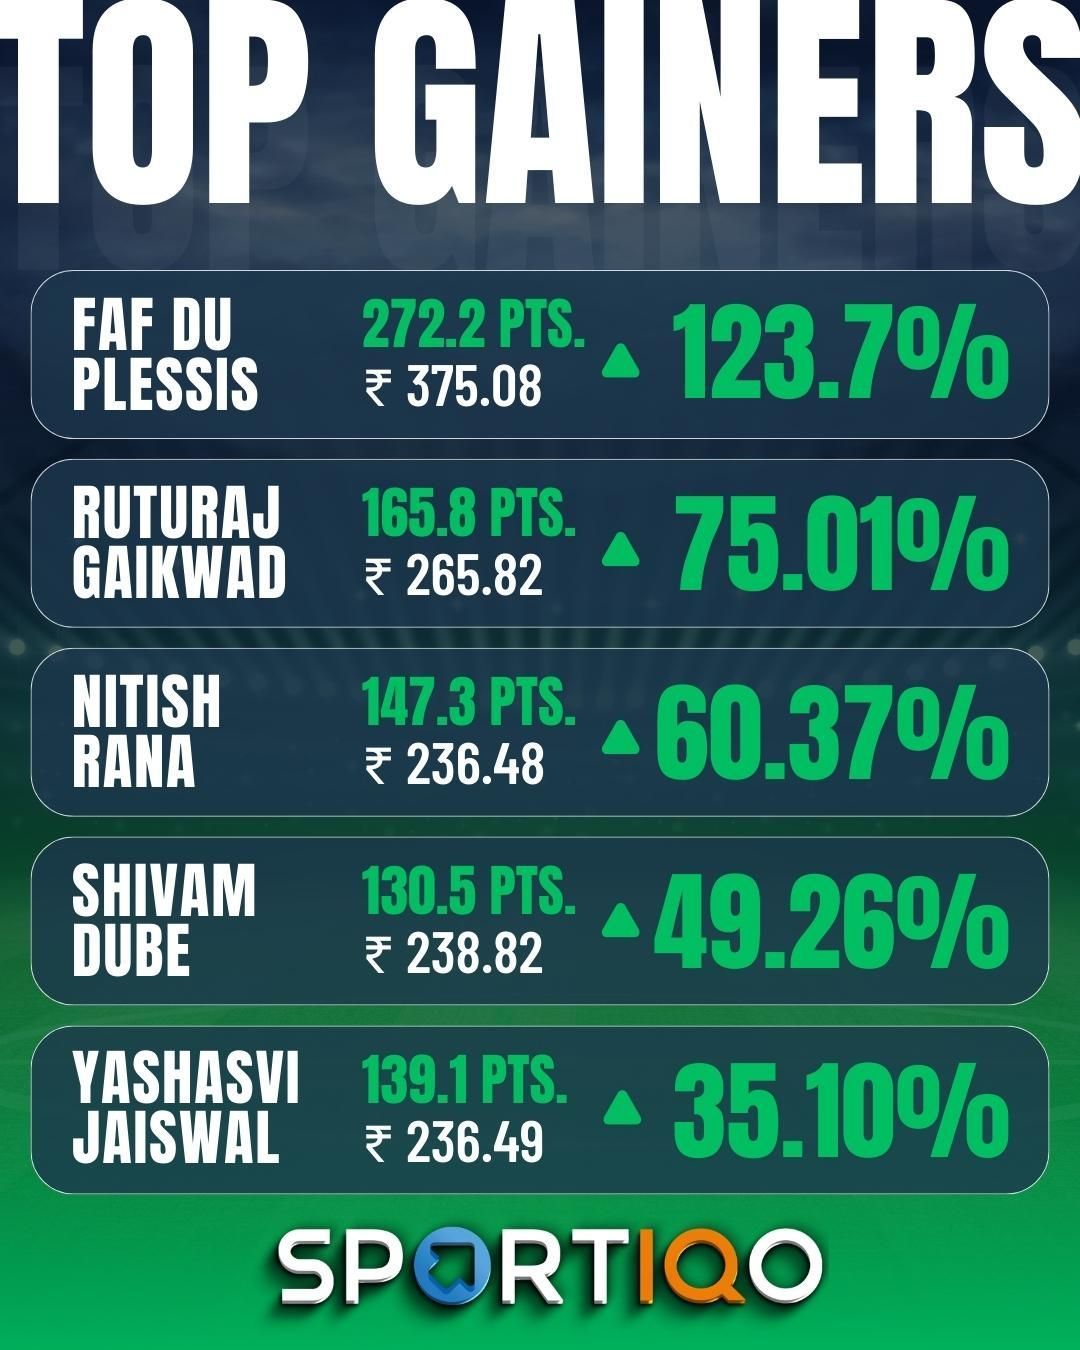 Faf du Plessis and former opening partner Ruturaj Gaikwad are high up the top gainers&#039; list.